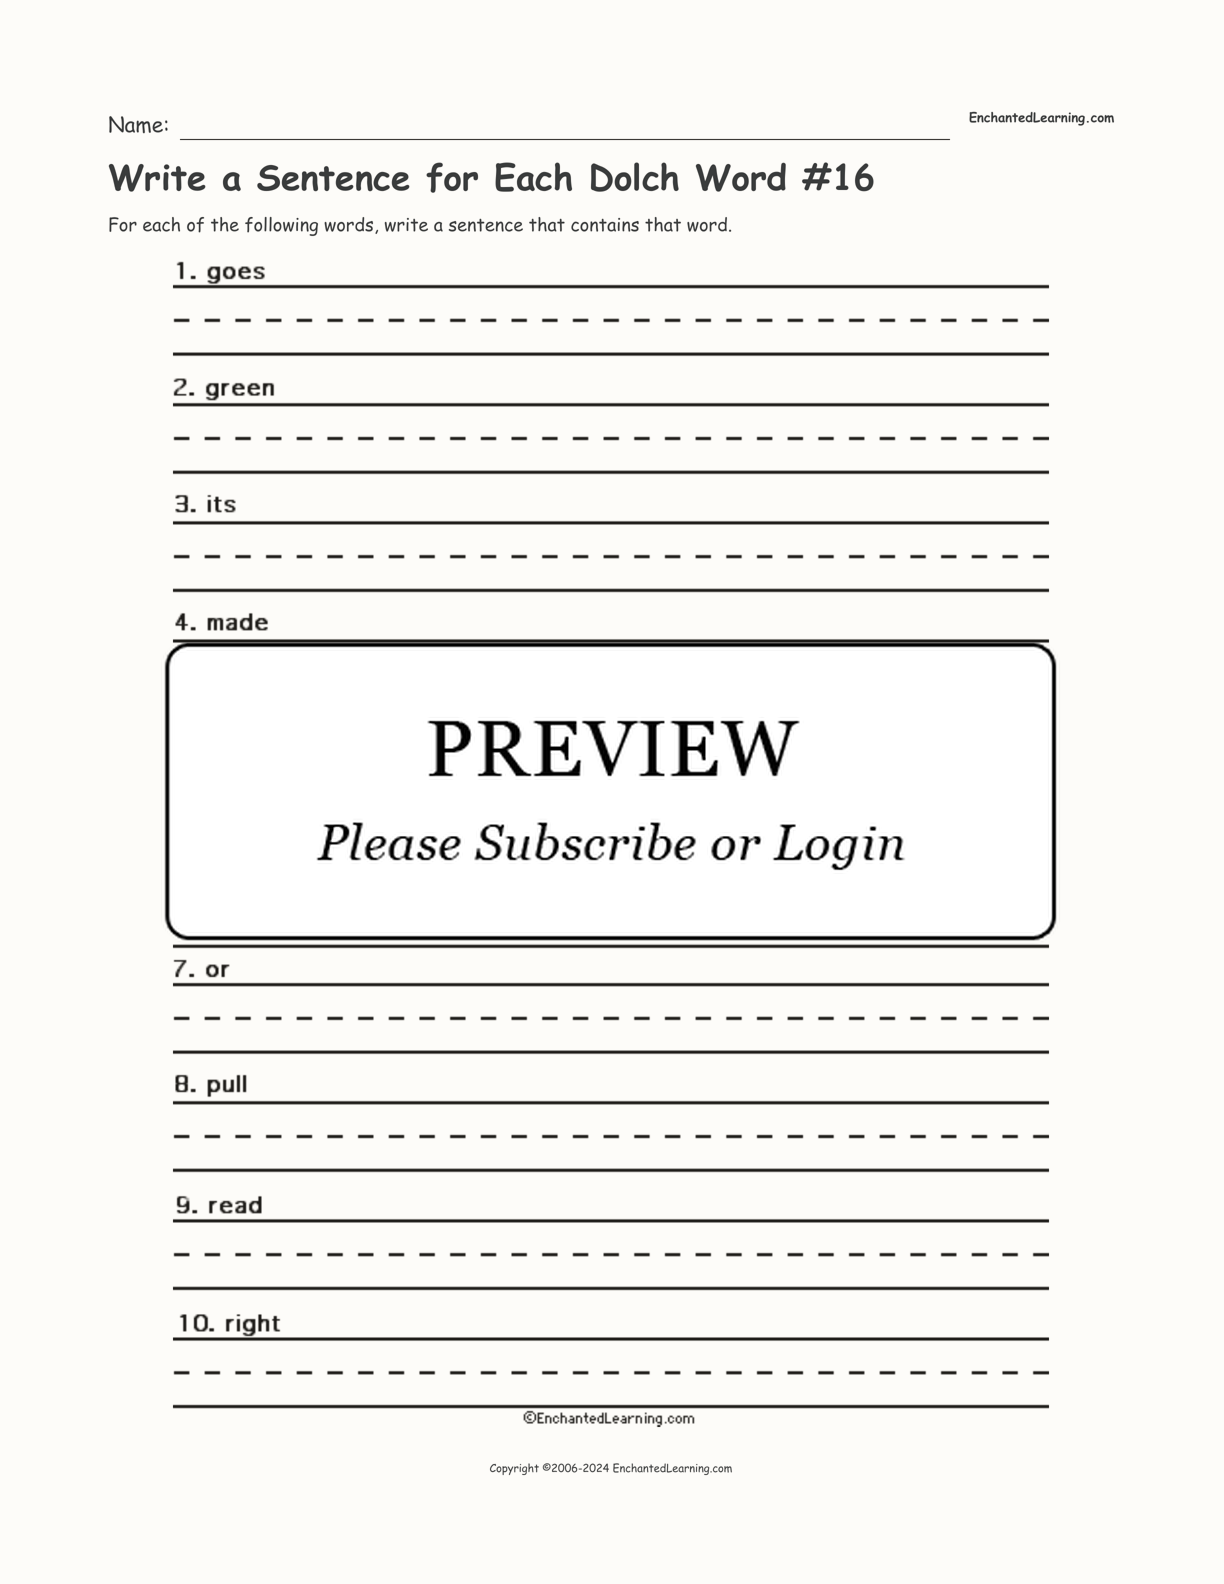 Write a Sentence for Each Dolch Word #16 interactive worksheet page 1